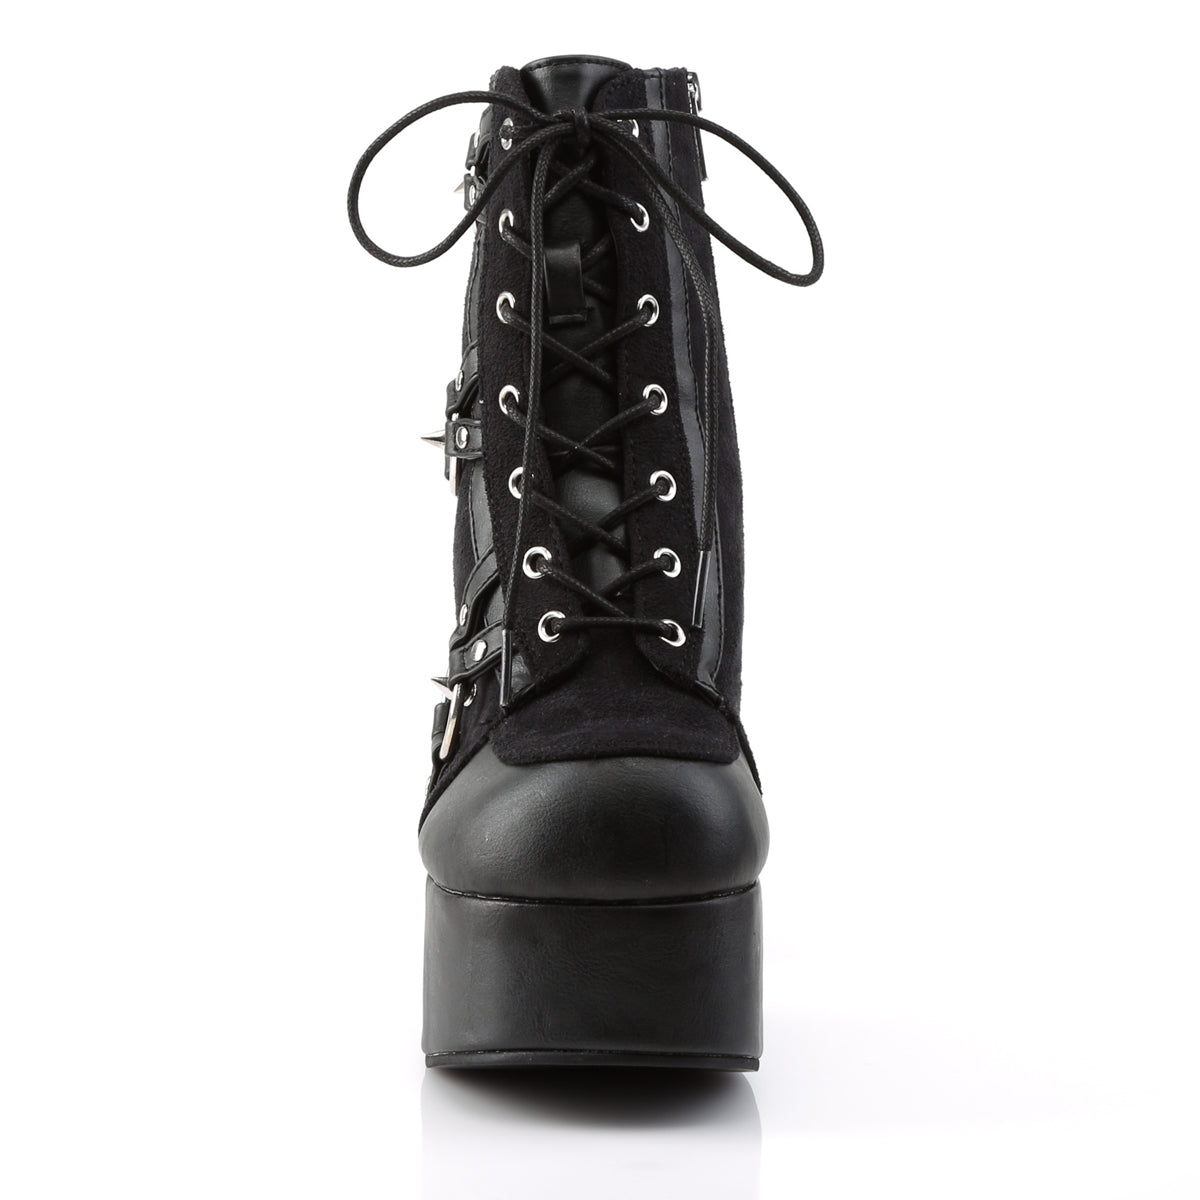 CHARADE-100 Black Vegan Leather-Suede Ankle Boot Demonia